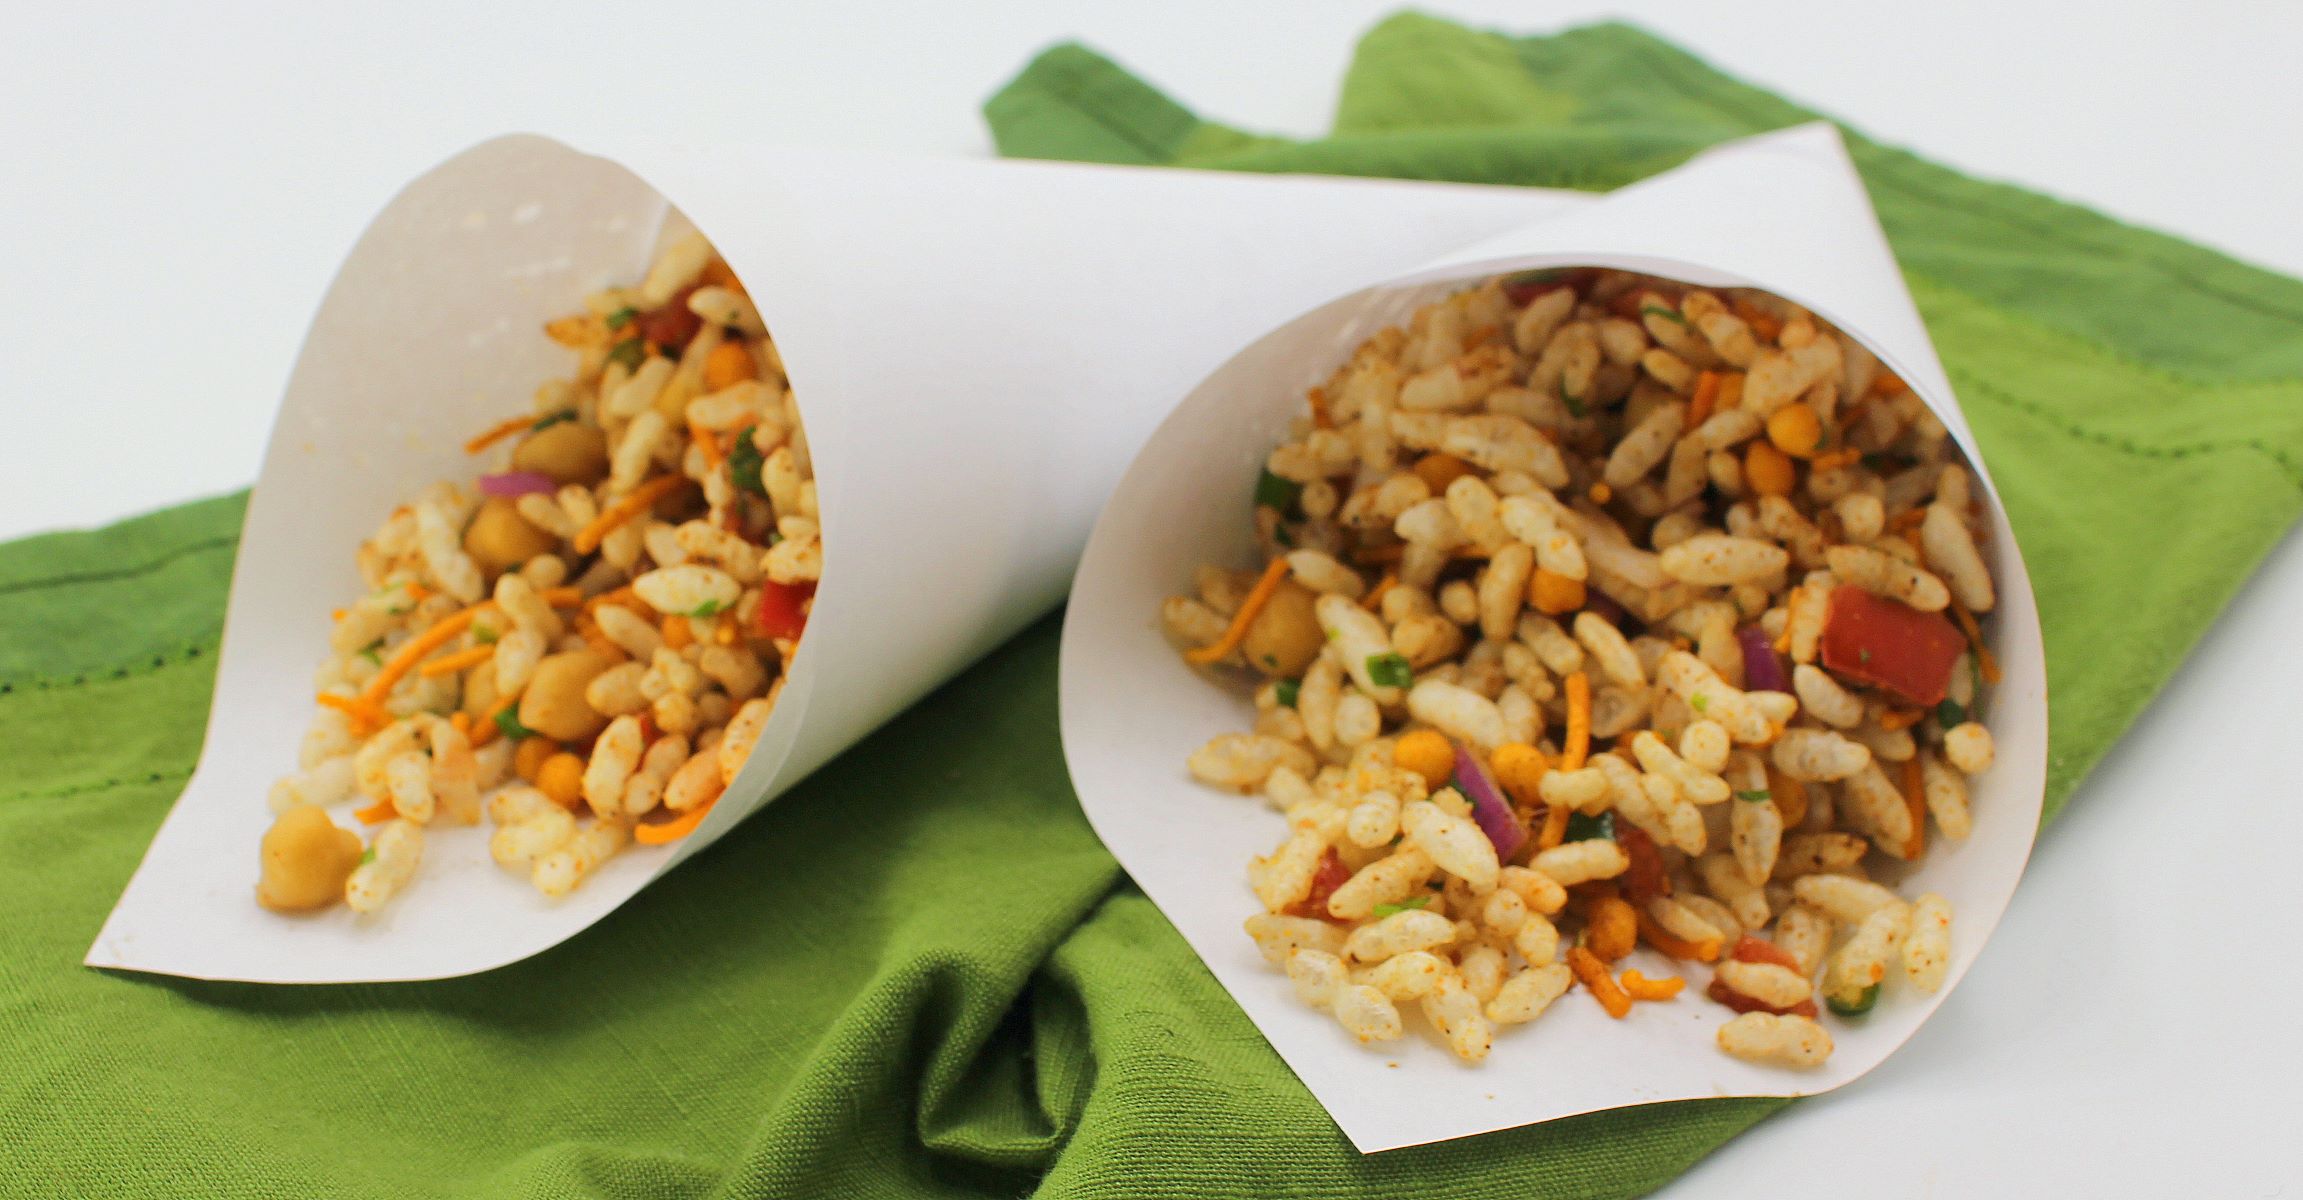 Rice Wrappers Glossary, Health Benefits, Nutritional Information + Recipes  with Rice Wrappers